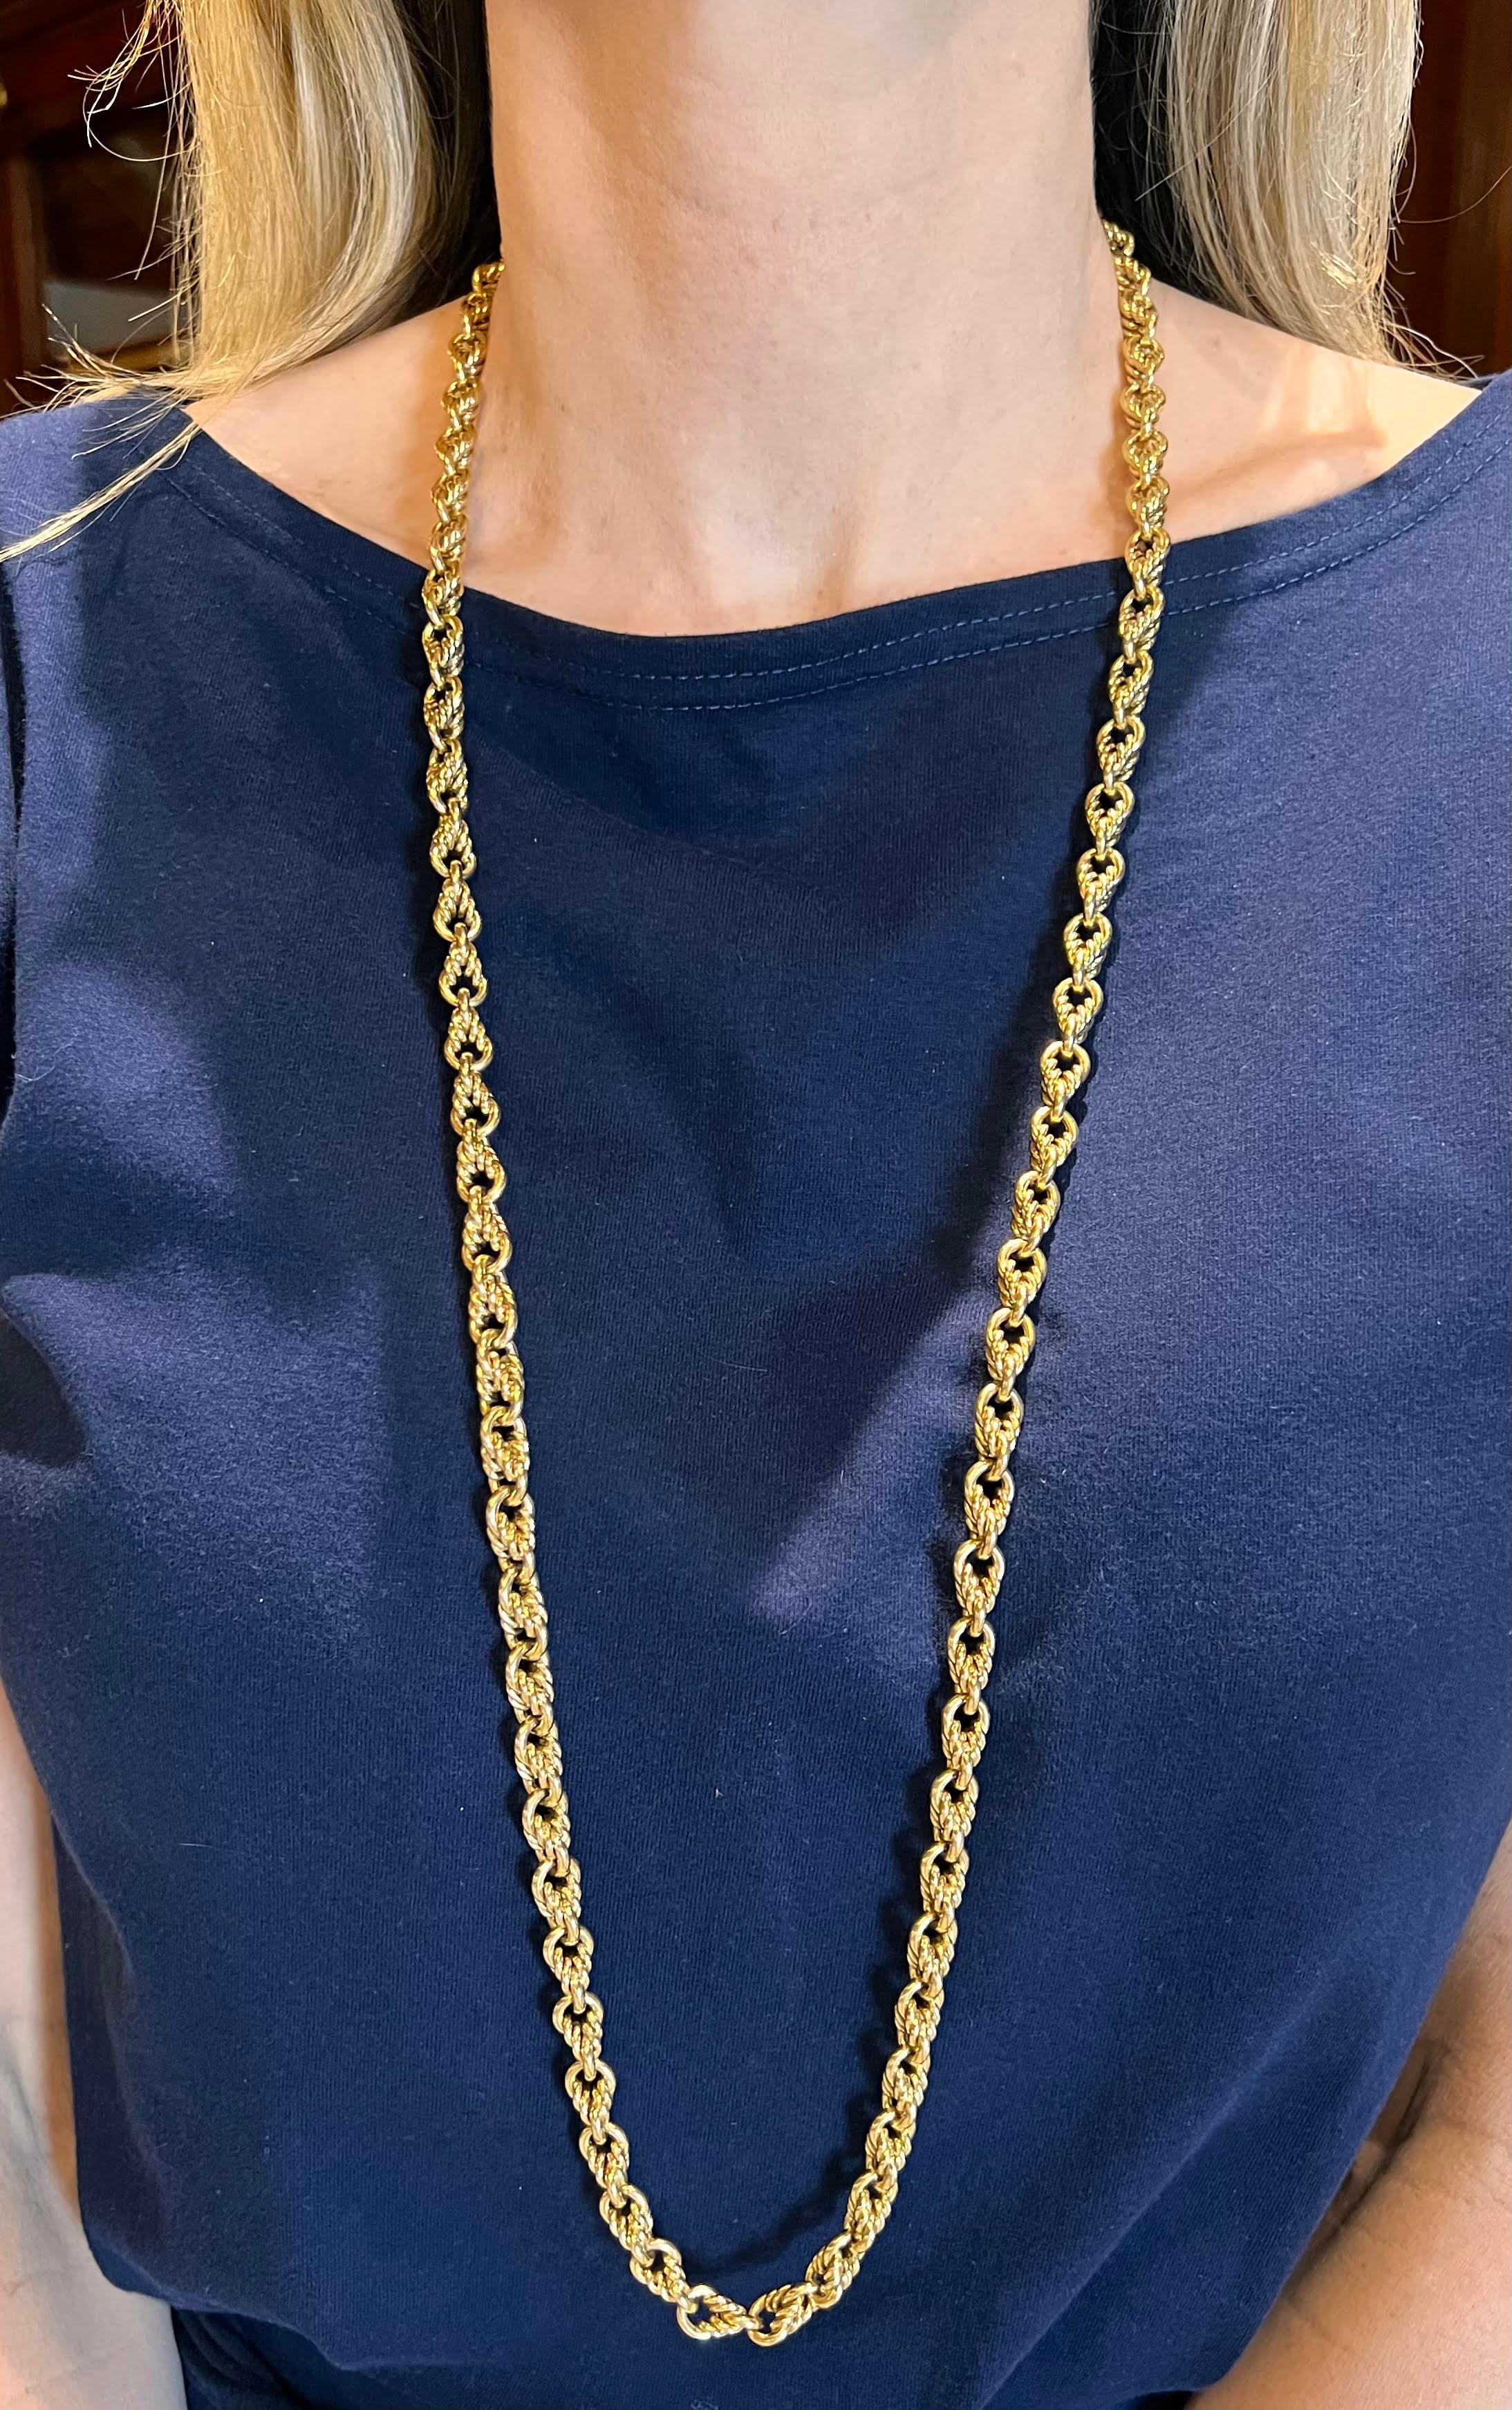 Twisted rope link neck chain by Tiffany in 18k yellow gold. Solid polished twisted rope links alternate with solid circular polished links.  Eternity design with no clasp. Signed '750 © TIFFANY & CO'.  Measuring 37 inches in length and 8.8mm in